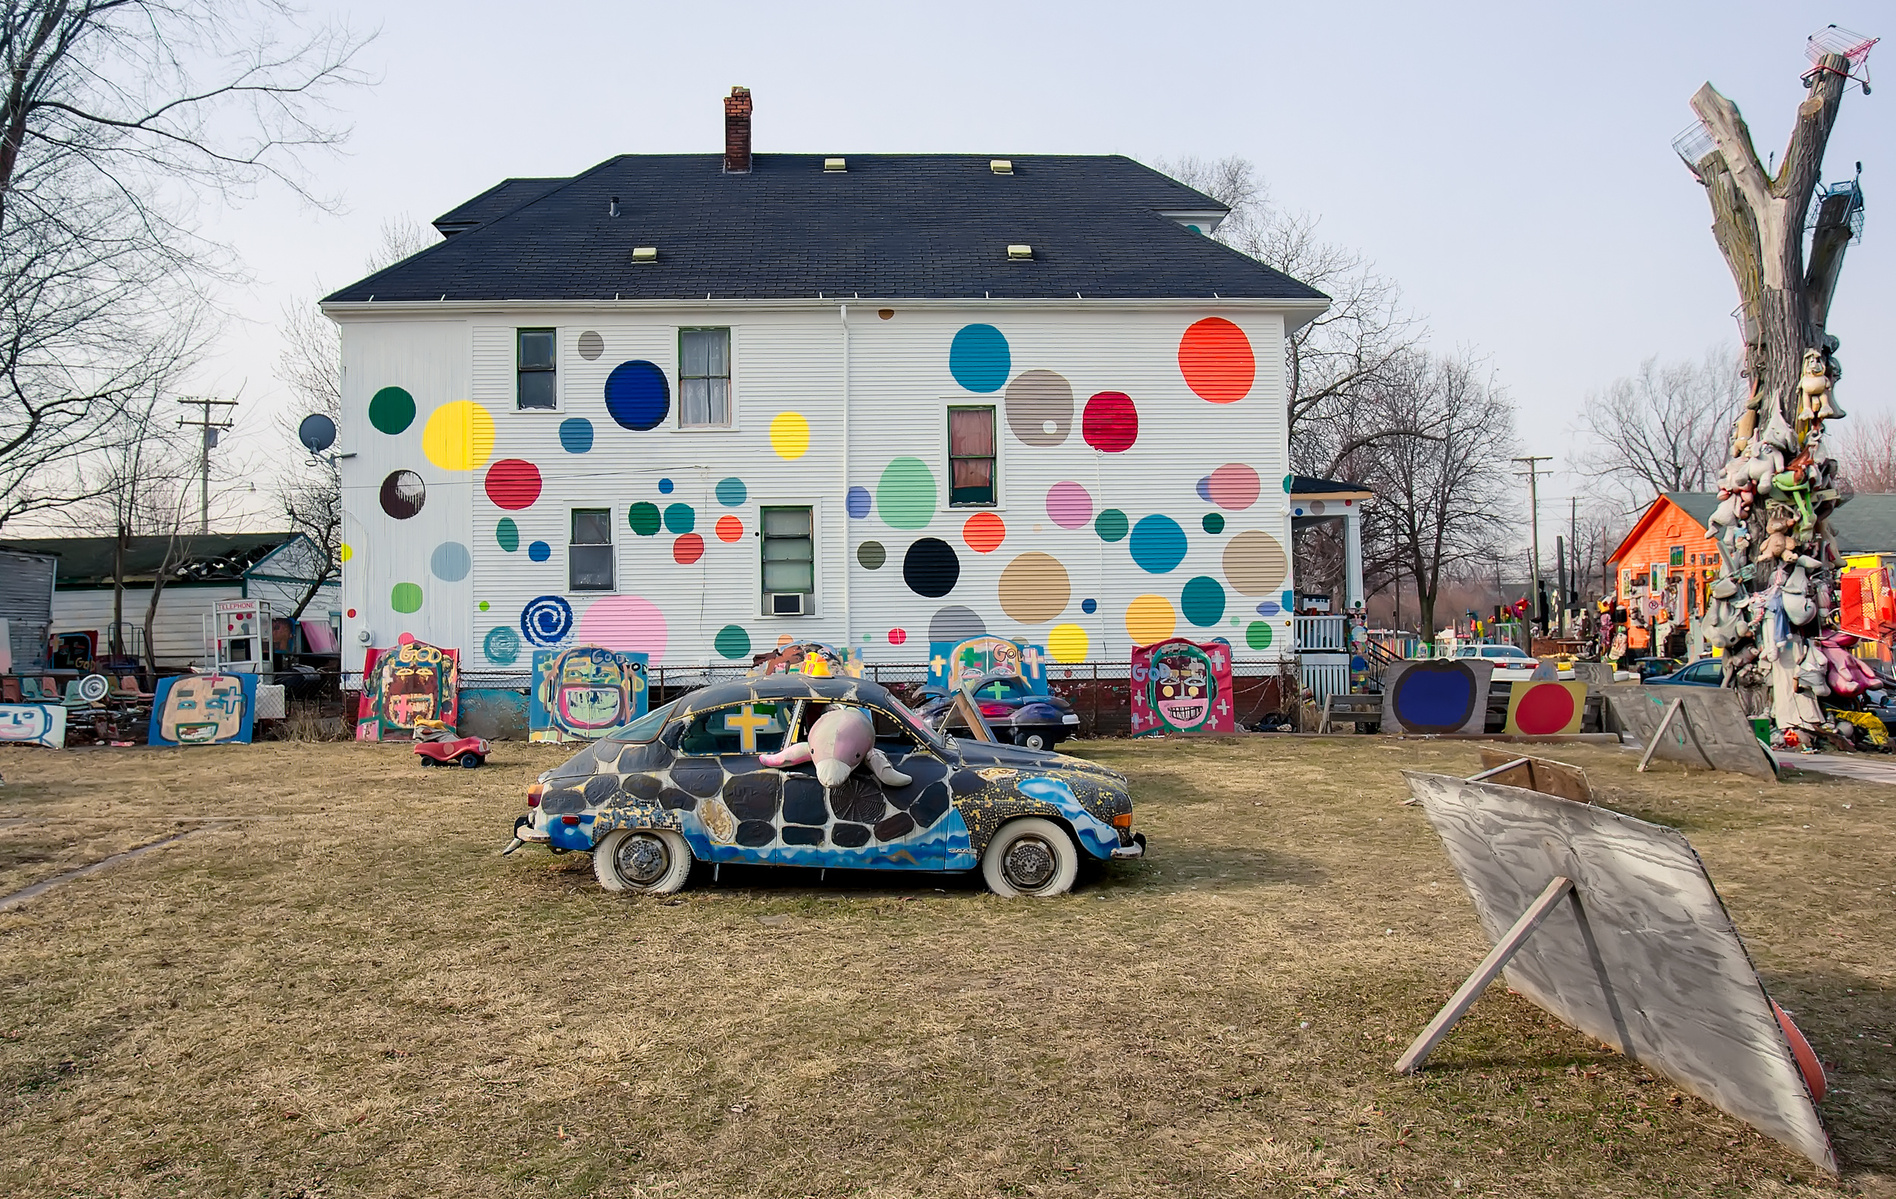 Immerse yourself in Tyree Guyton's visionary art at The Heidelberg Project in Detroit, MI. Discover the enchanting scene with a turtle-painted car, complemented by a dolphin inside. The iconic Polka Dot House.